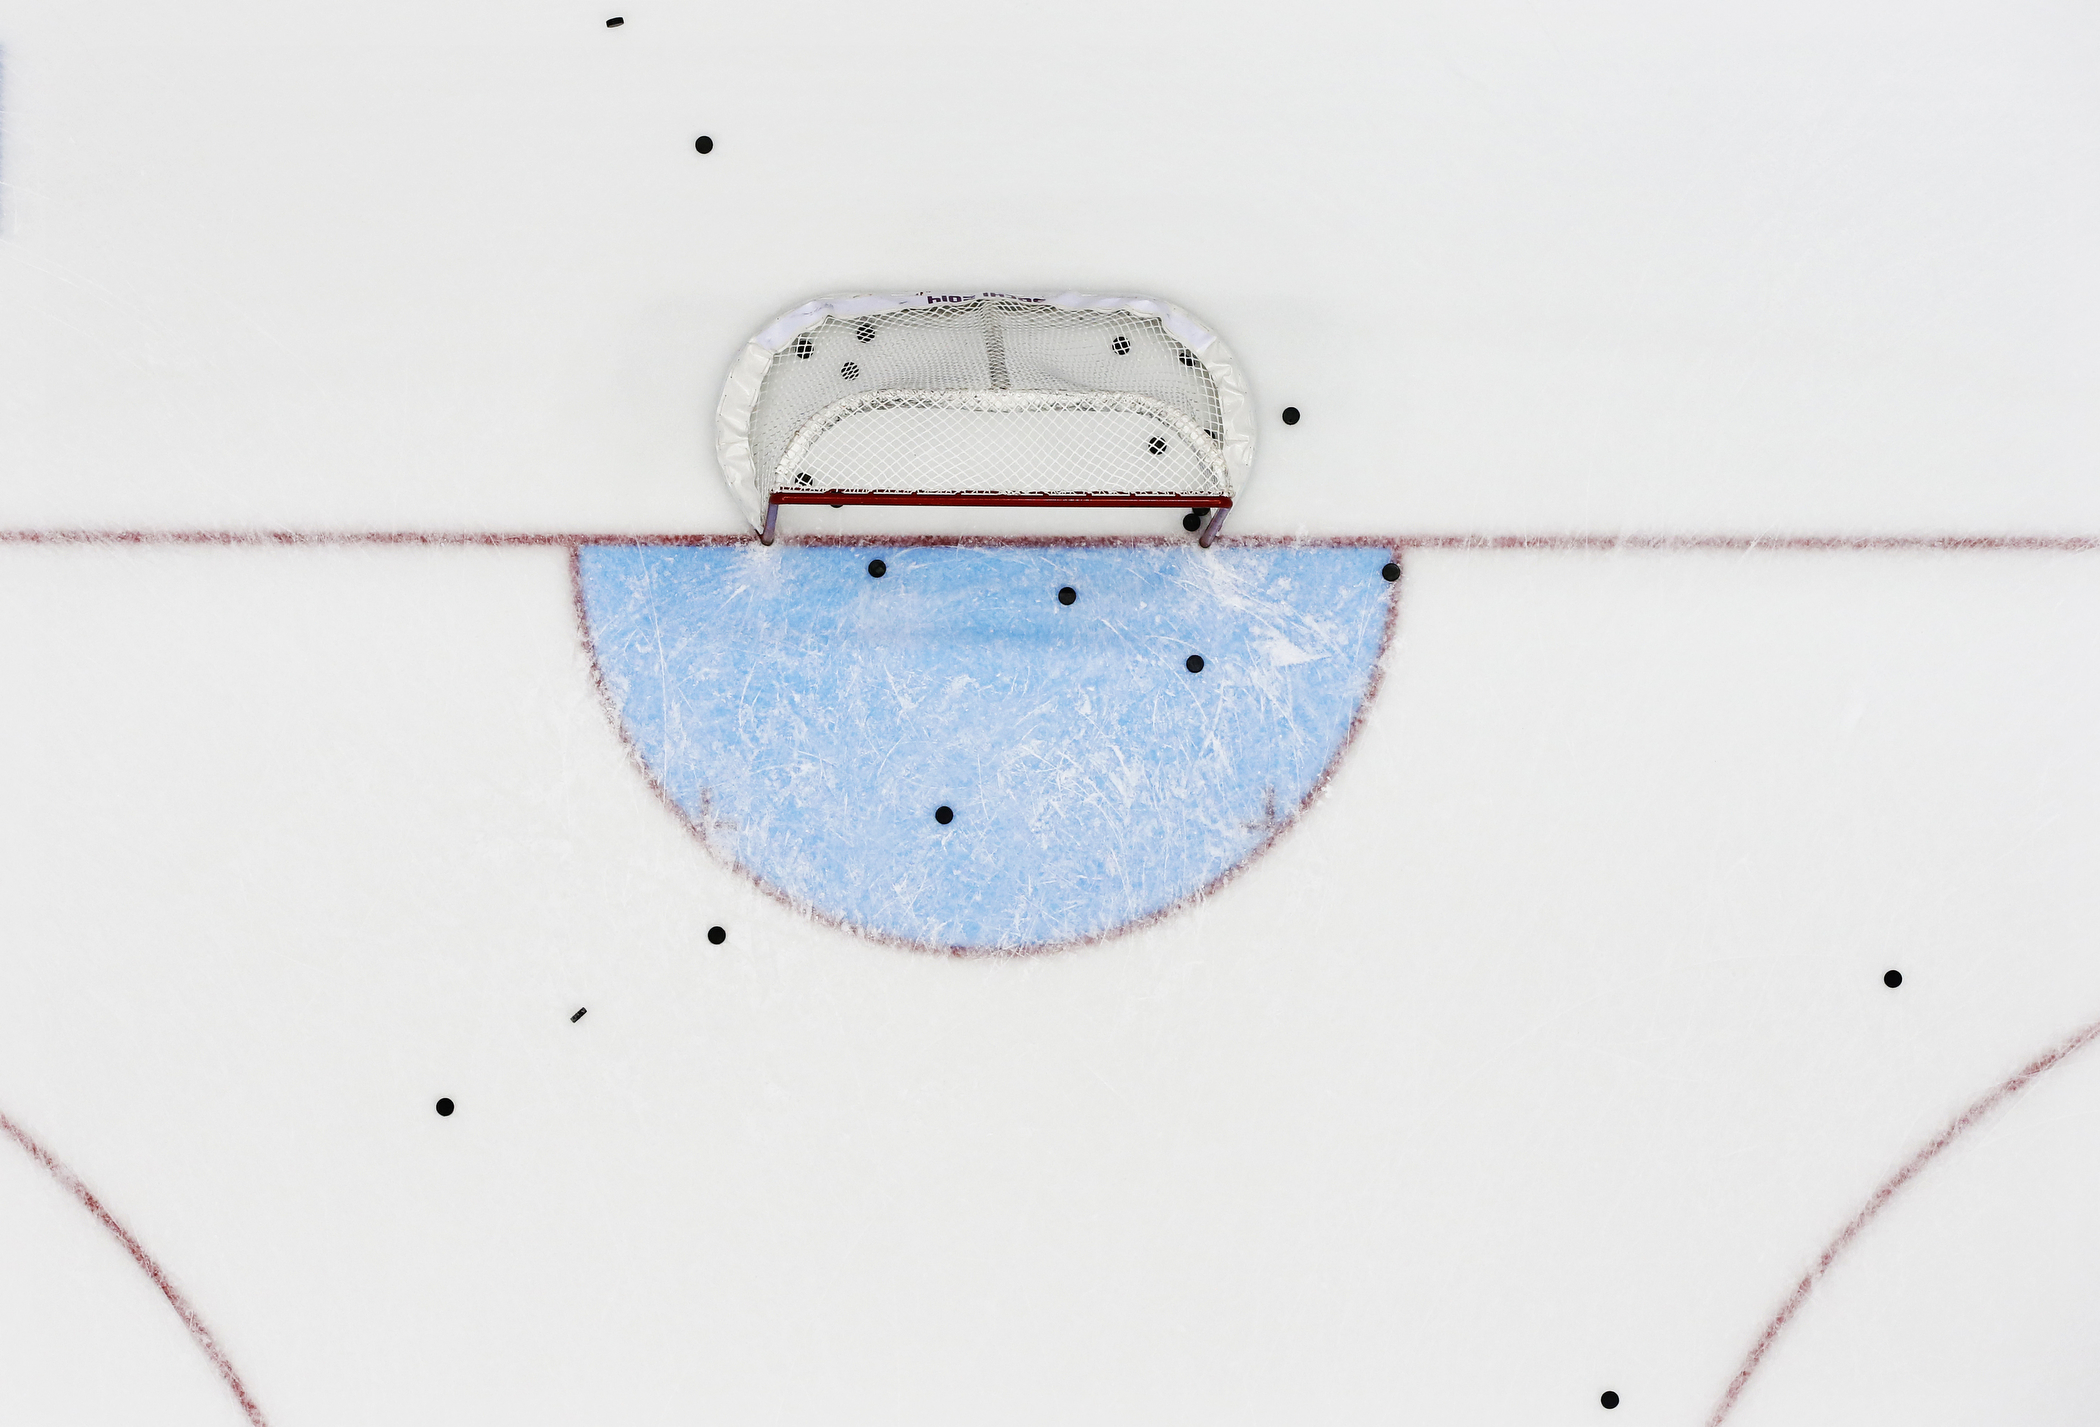 Pucks are left on the ice from the warm up session priot to the Men's Preliminary Round Group B match between Finland and Canada in the Ice Hockey tournament at the Sochi 2014 Olympic Games in Sochi, Russia, Feb. 16, 2014.